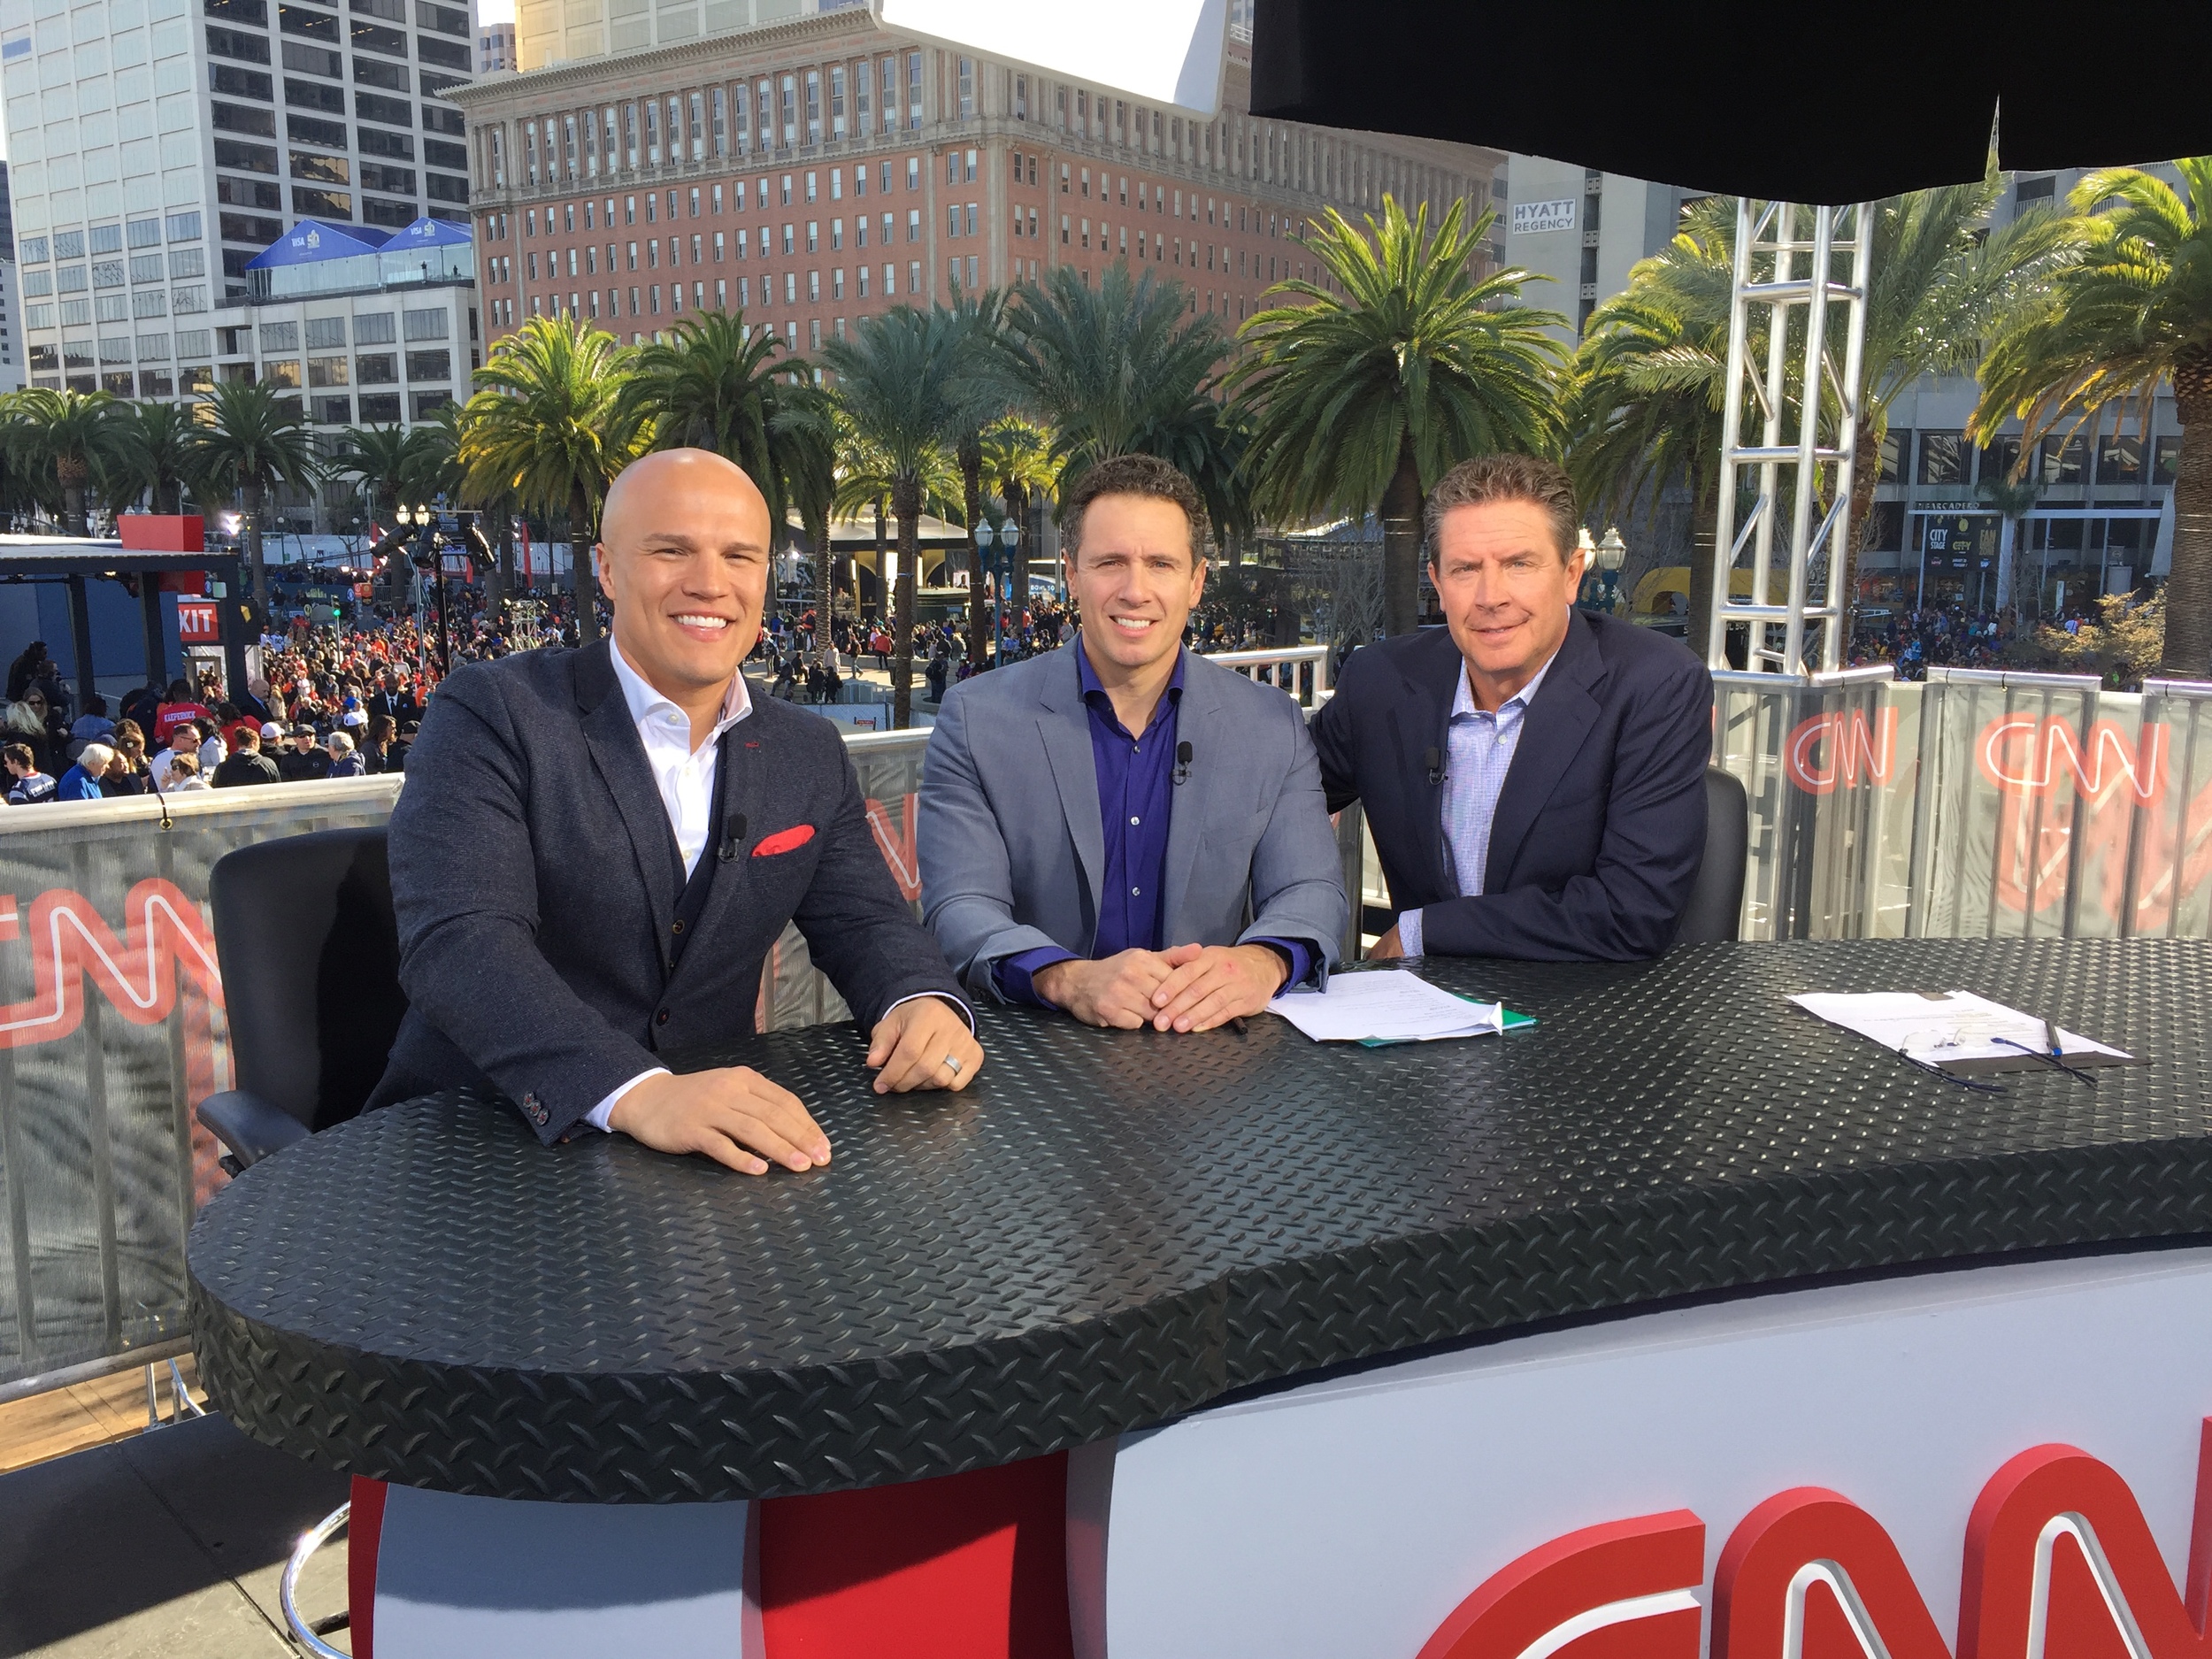 CNN's "Kickoff by the Bay" for Super Bowl 50